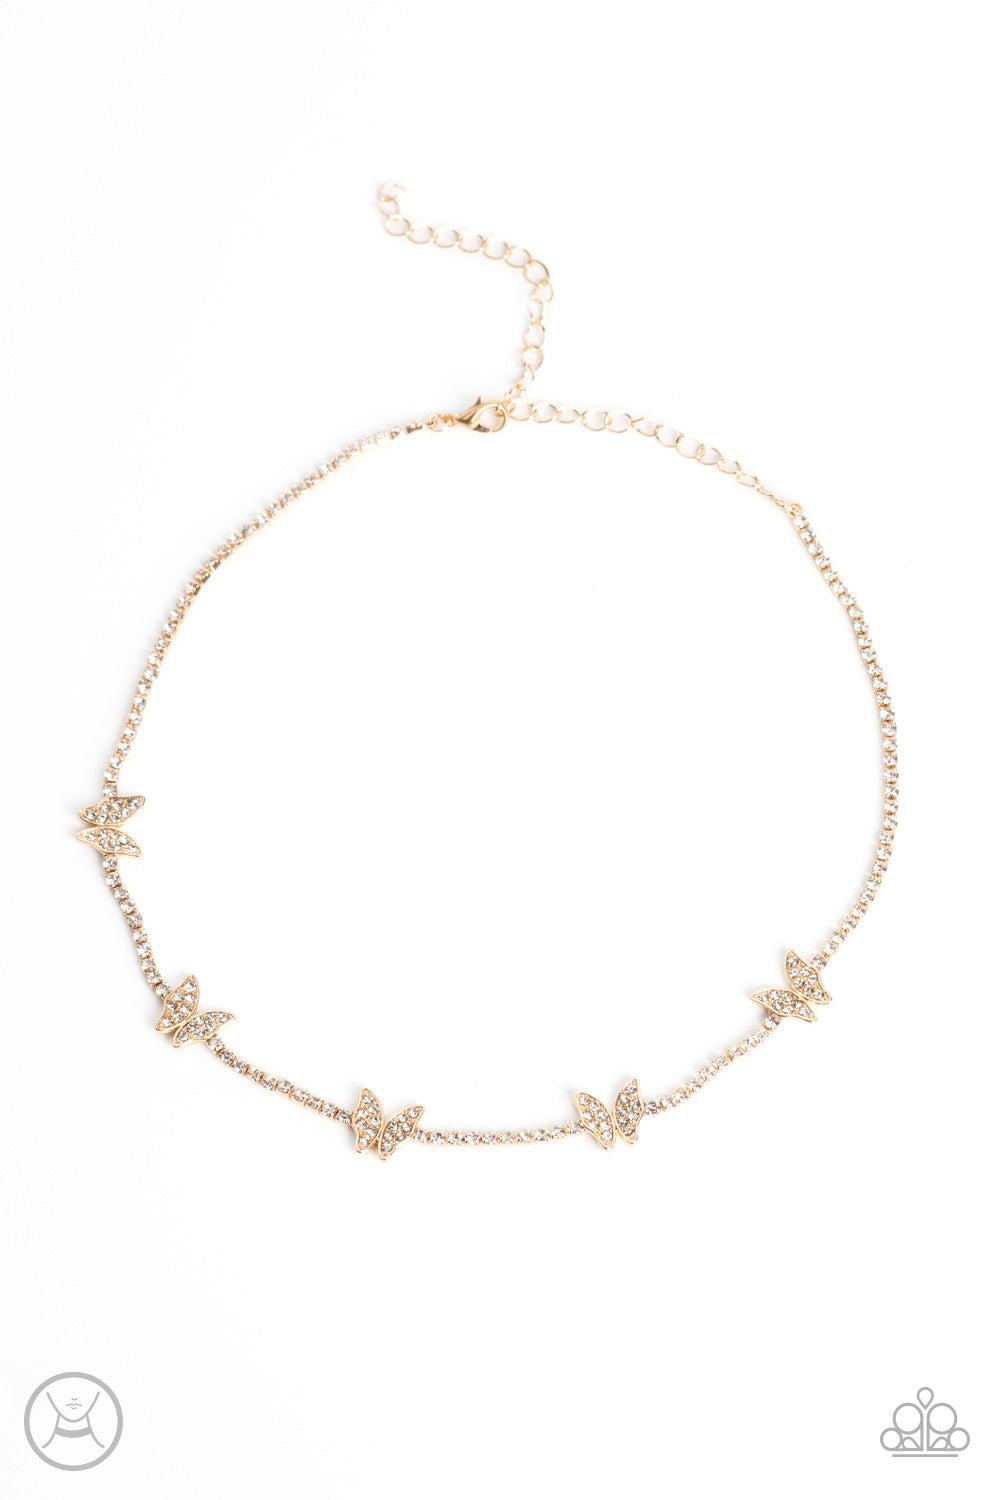 Fluttering Fanatic Gold &amp; White Rhinestone Butterfly Choker Necklace - Paparazzi Accessories- lightbox - CarasShop.com - $5 Jewelry by Cara Jewels